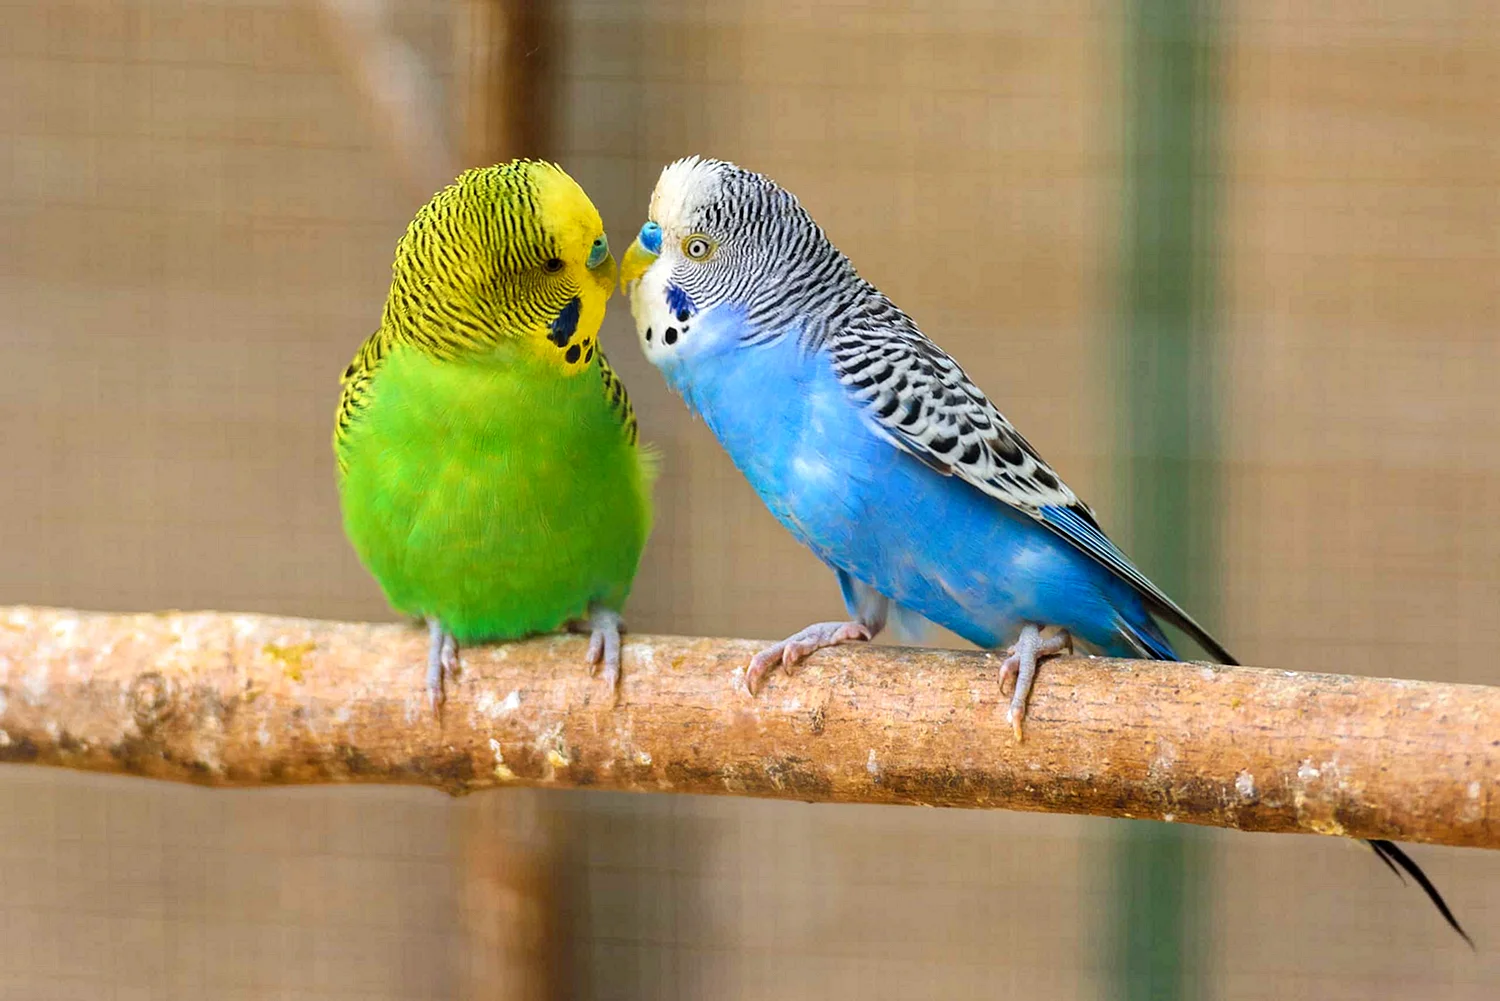 A pair of Blue Canaries